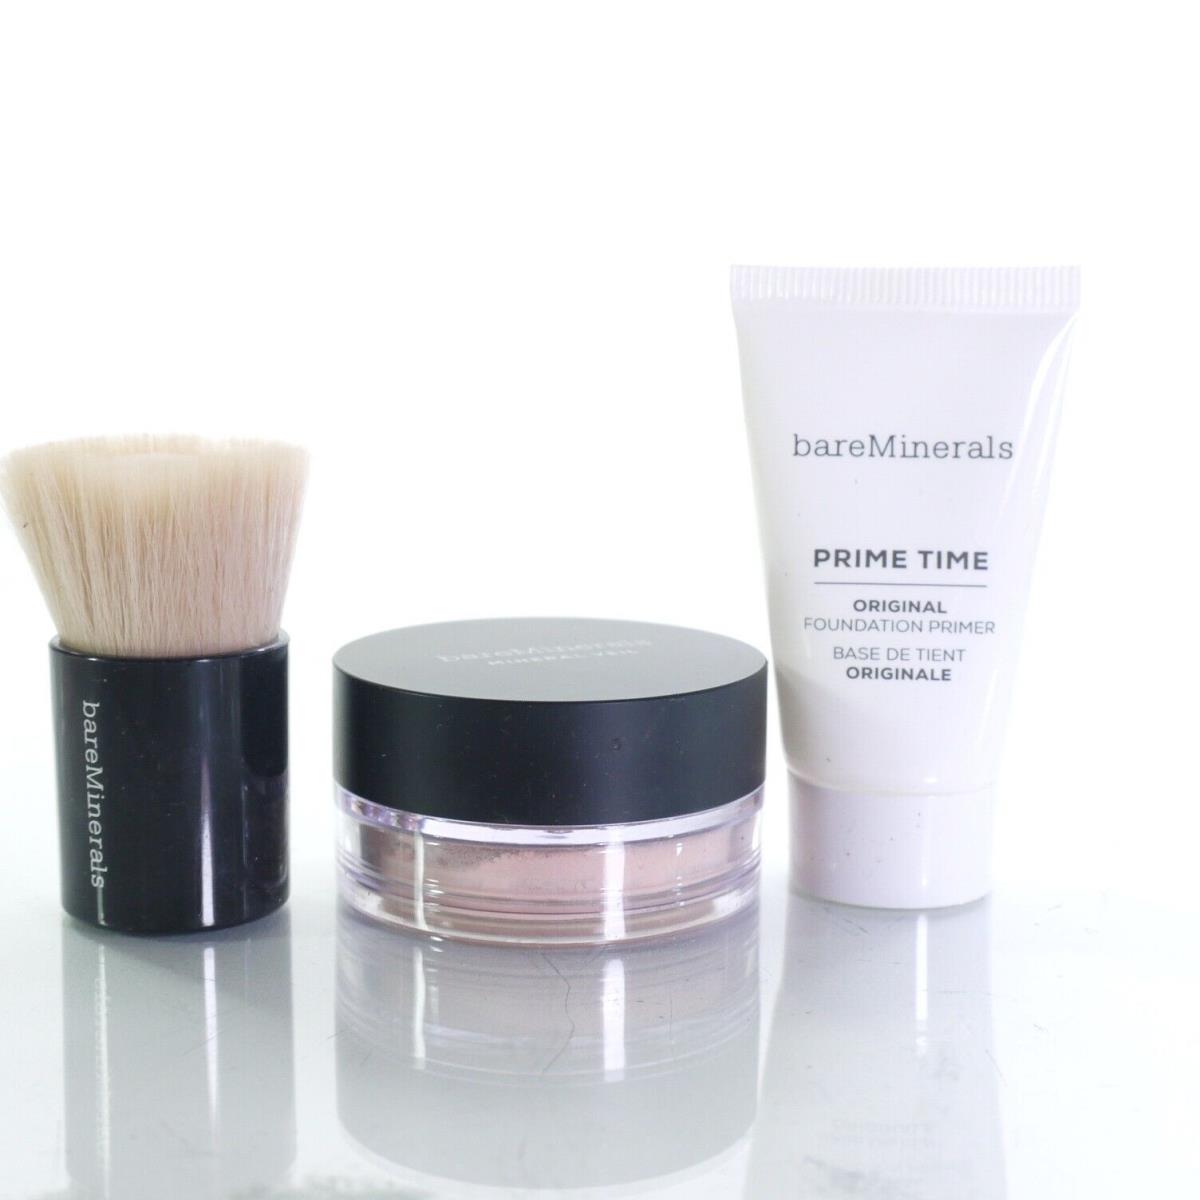 Bareminerals Get Started Complexion Kit 3 Piece I Am Kit. Read